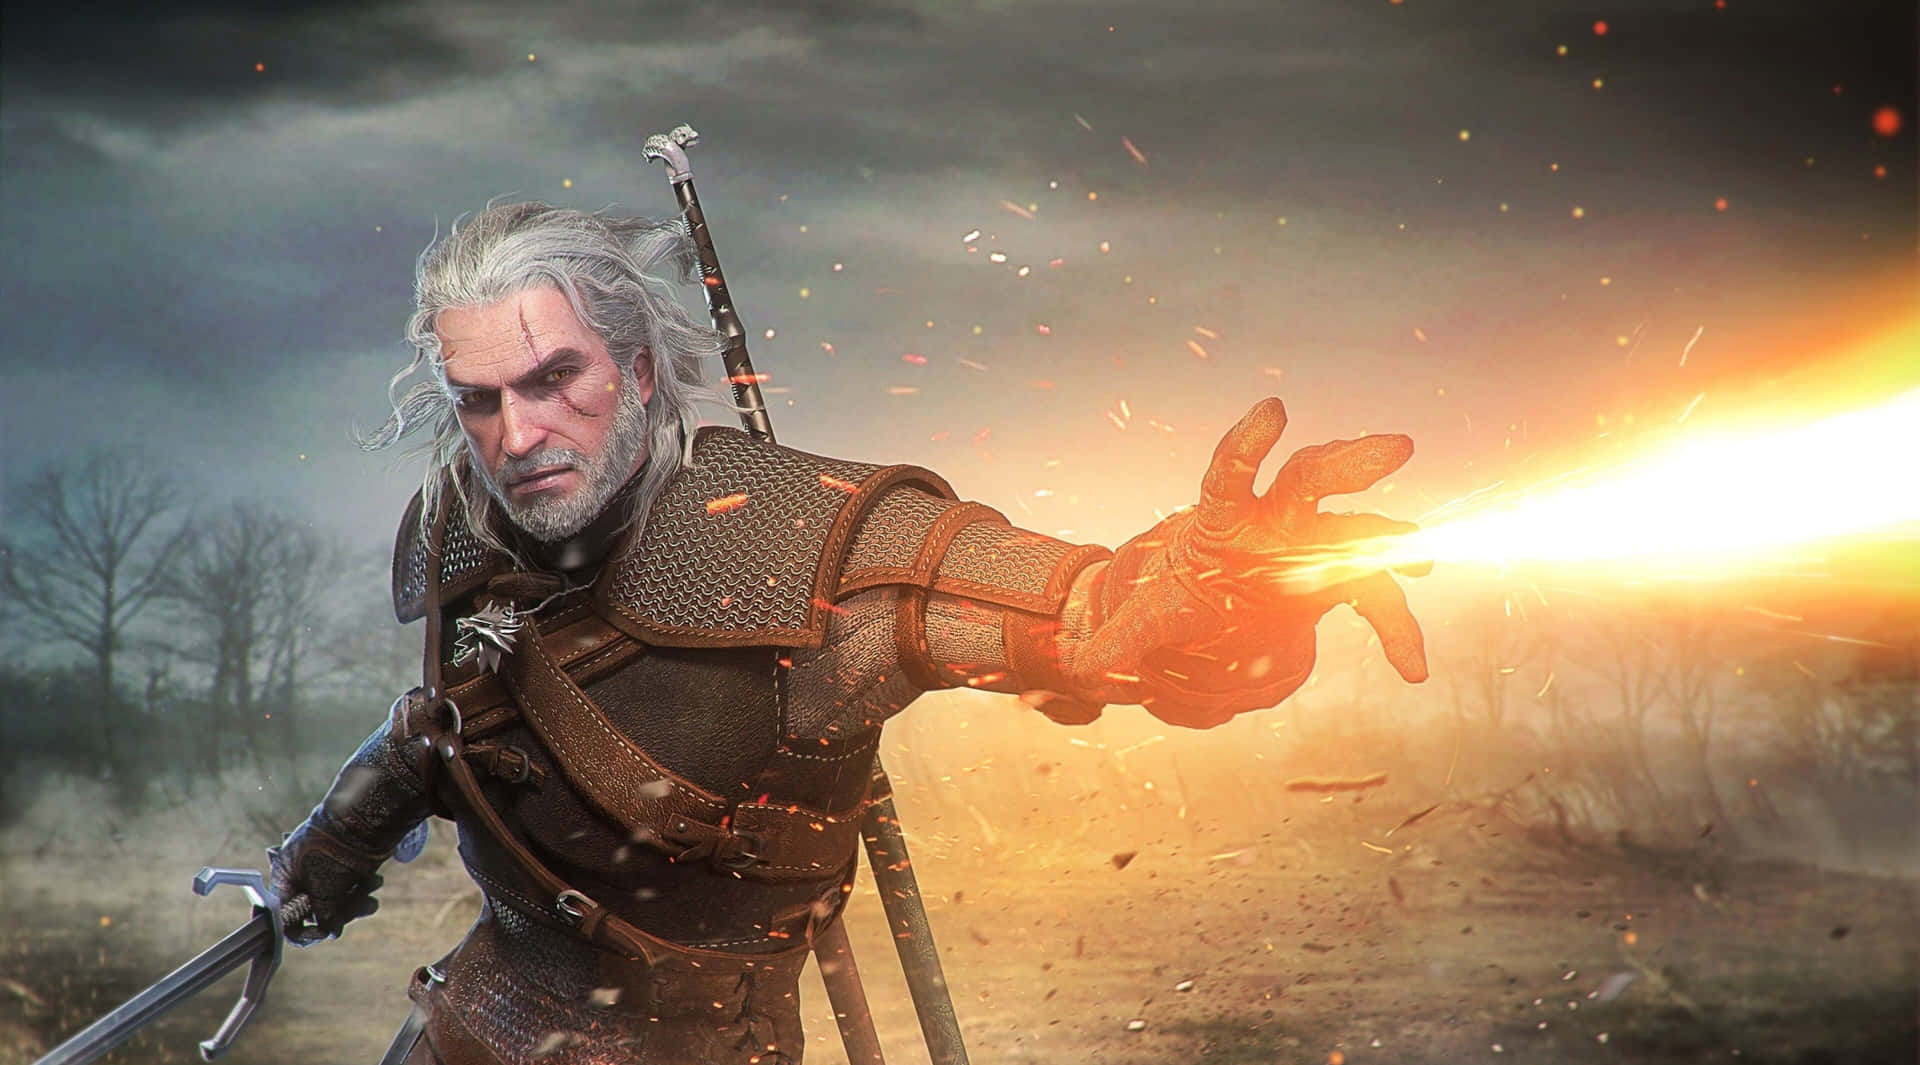 Join Geralt on a breathtaking journey in The Witcher 3: Wild Hunt